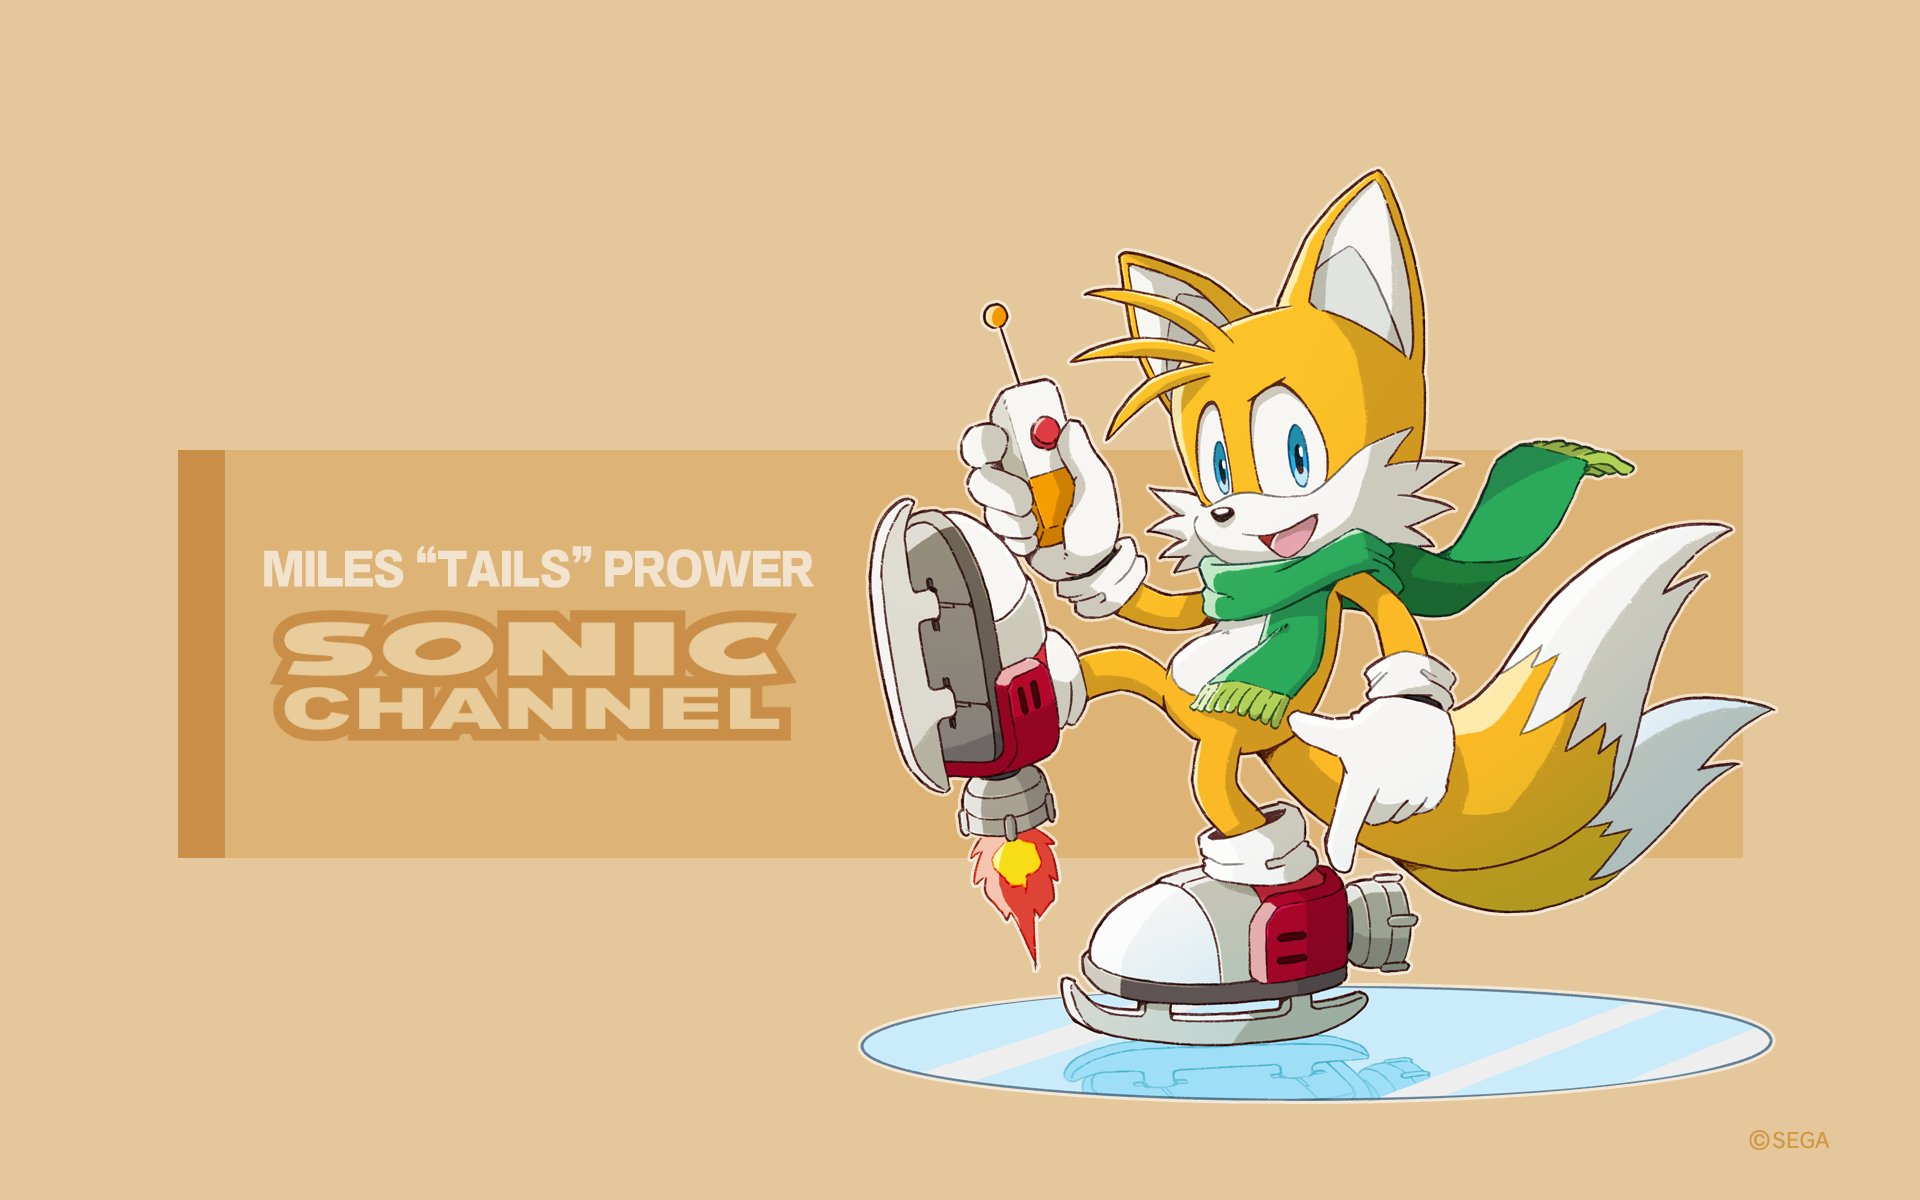 Tails' Channel, celebrating 15 years on X: New: Extended gameplay footage  of #SonicFrontiers from @IGN will premiere 1 June 2022 at 12:00 pm ET.   metadata says that the preview will be